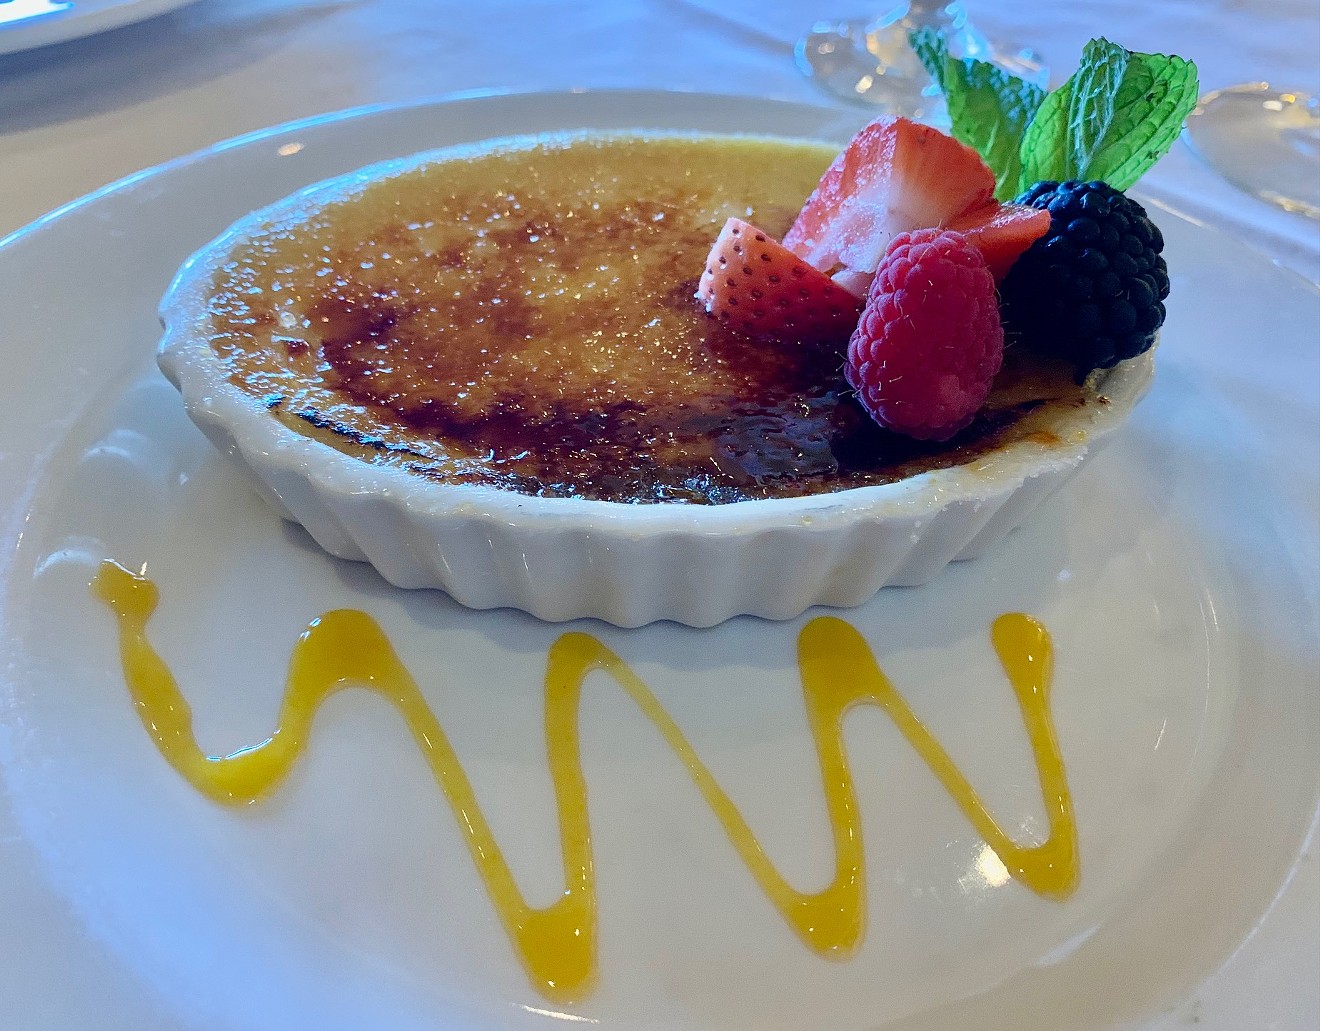 Creme brulee, where you been so long?